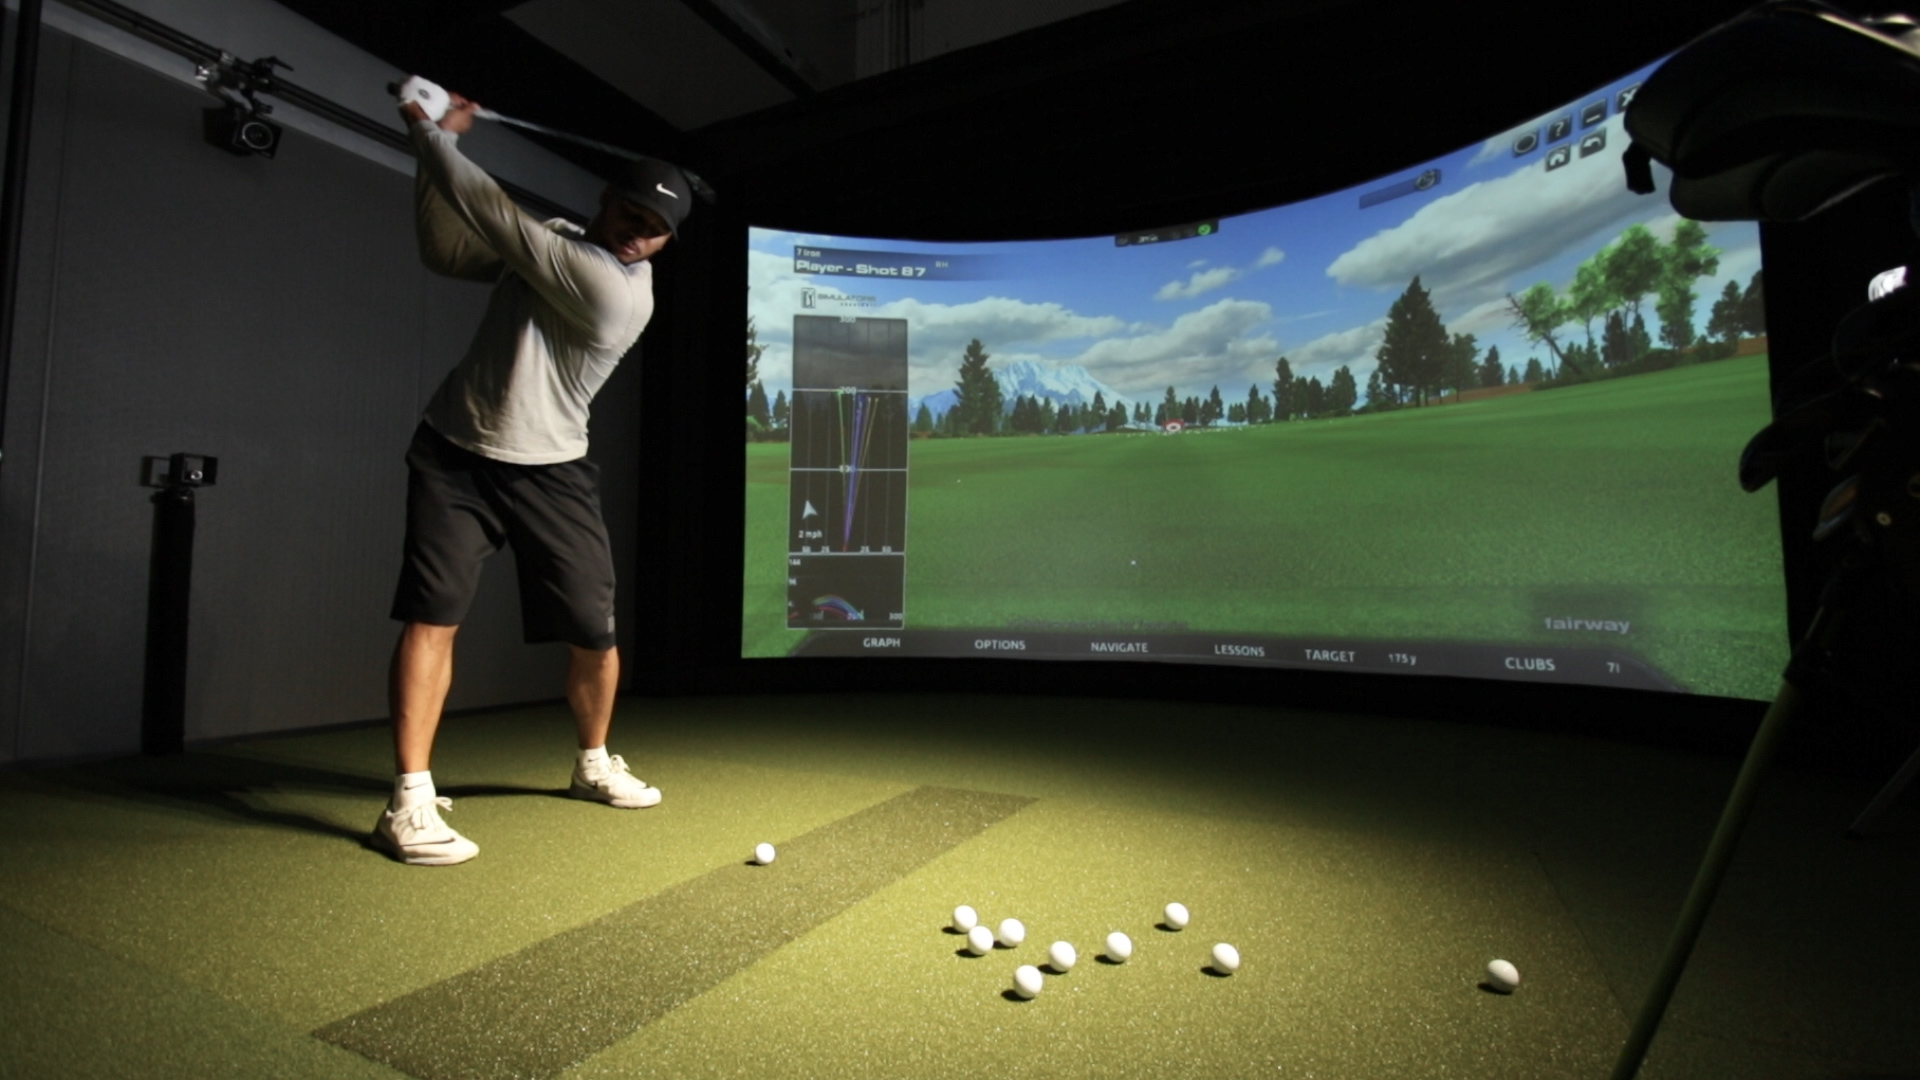 At the Gregg Rogers Golf Performance Centers, a student takes shots in a controlled, indoor, simulated golf environment where “The Gregg Rogers Golf Performance” Windows 10 UWP training app integrates with the golf simulators and cameras to record data from his shot such as body mechanics, club-head speed and swing angle.